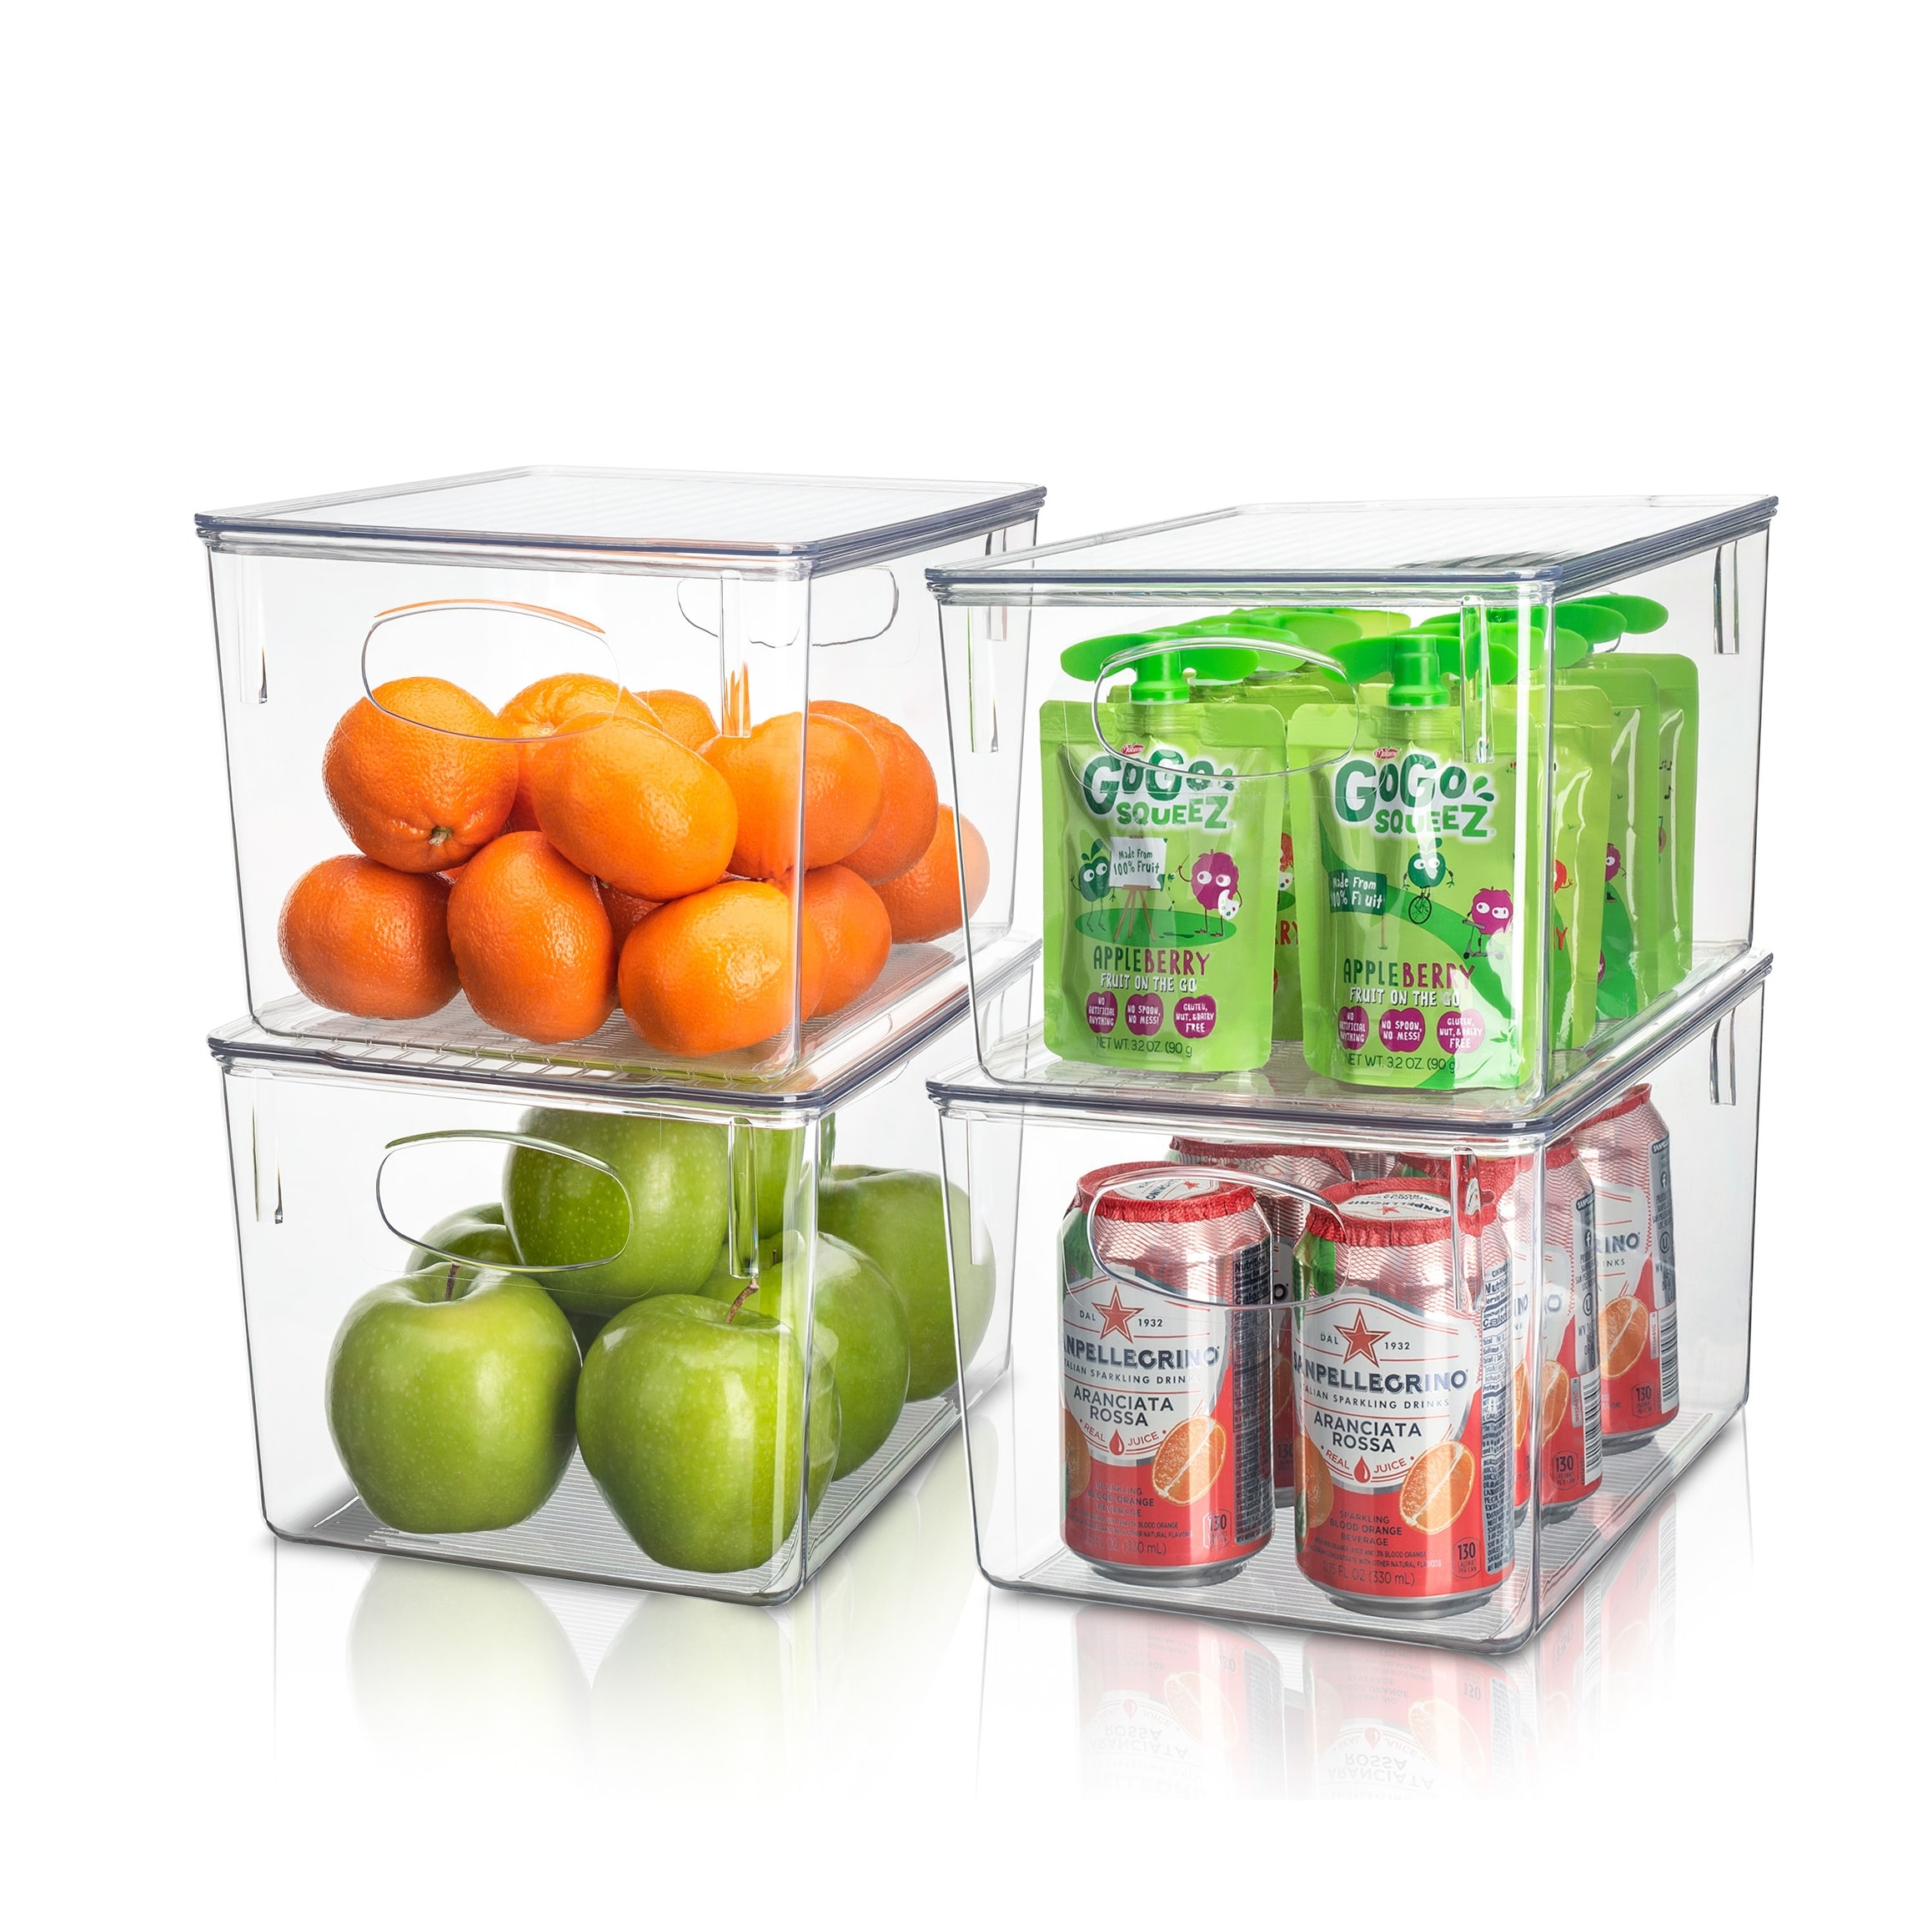 https://ak1.ostkcdn.com/images/products/is/images/direct/3352c0ee4de14b5ca6372f73466cff1d8eff36cc/Plastic-Storage-Clear-Bins-w--Lid%2C-Stackable-Pantry-Box-Bin-Containers.jpg